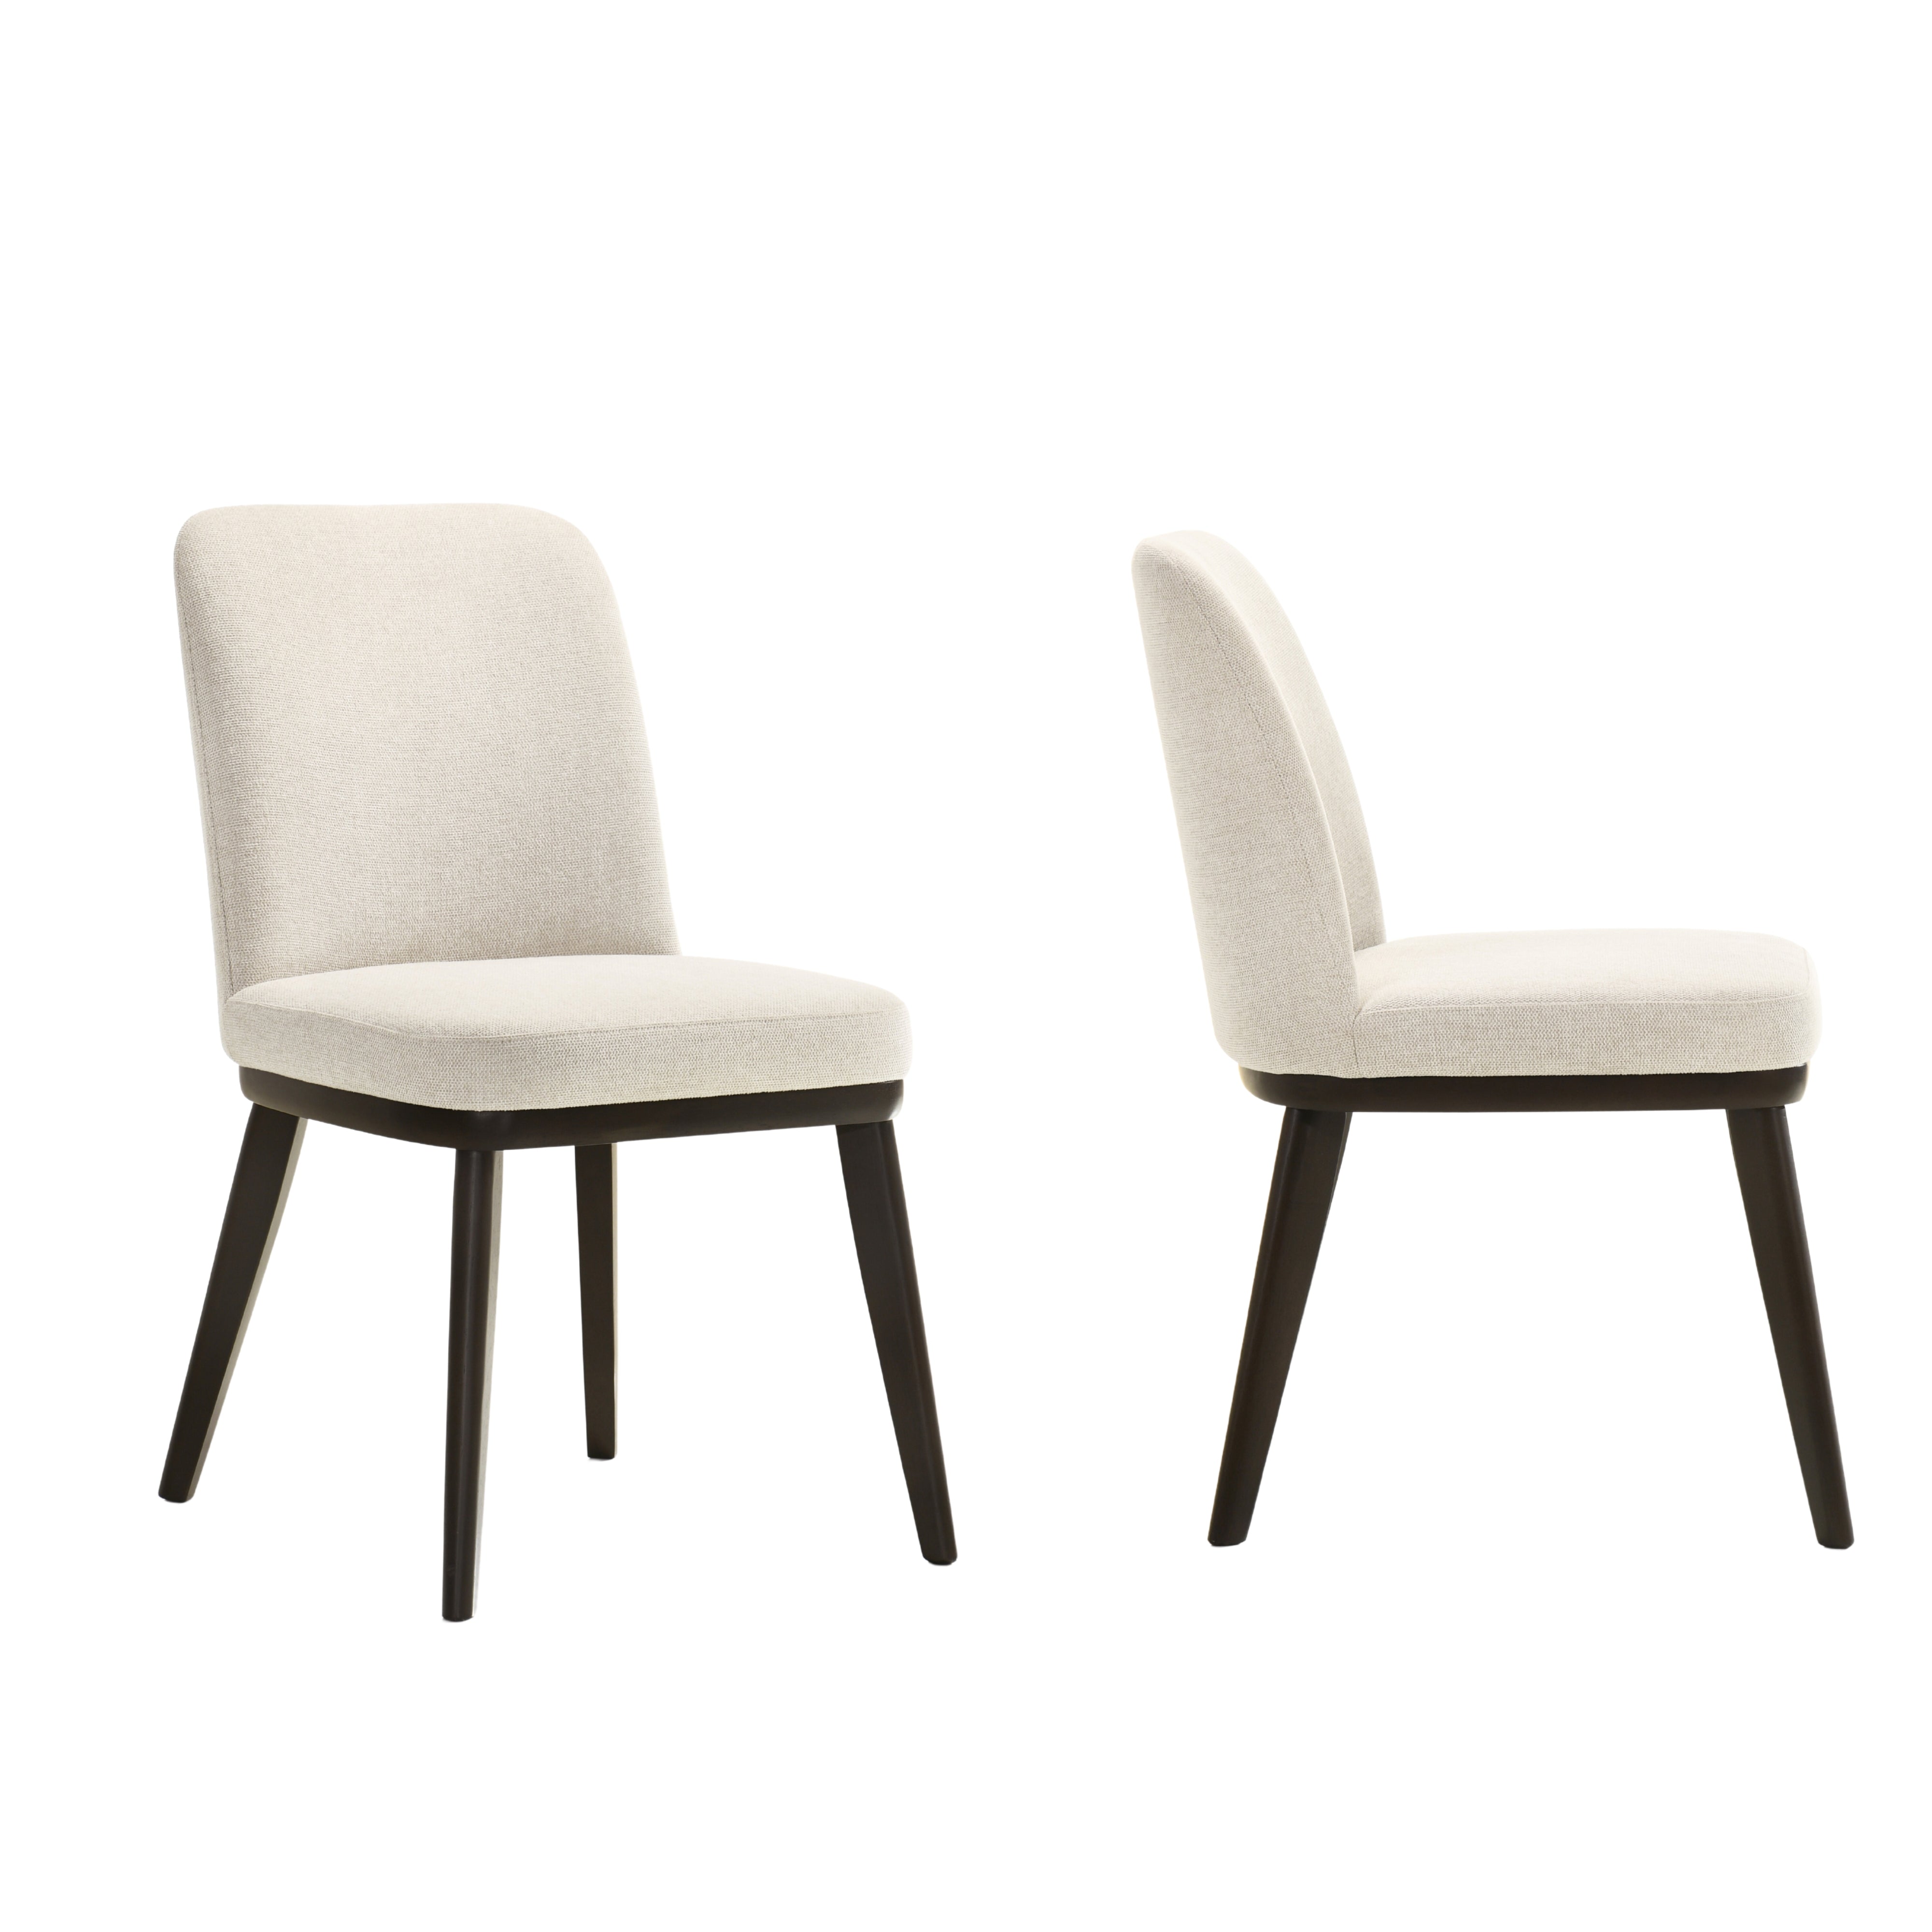 Berlin Solid Wood Upholstered Dining Chairs, Oatmeal (Set of 2)